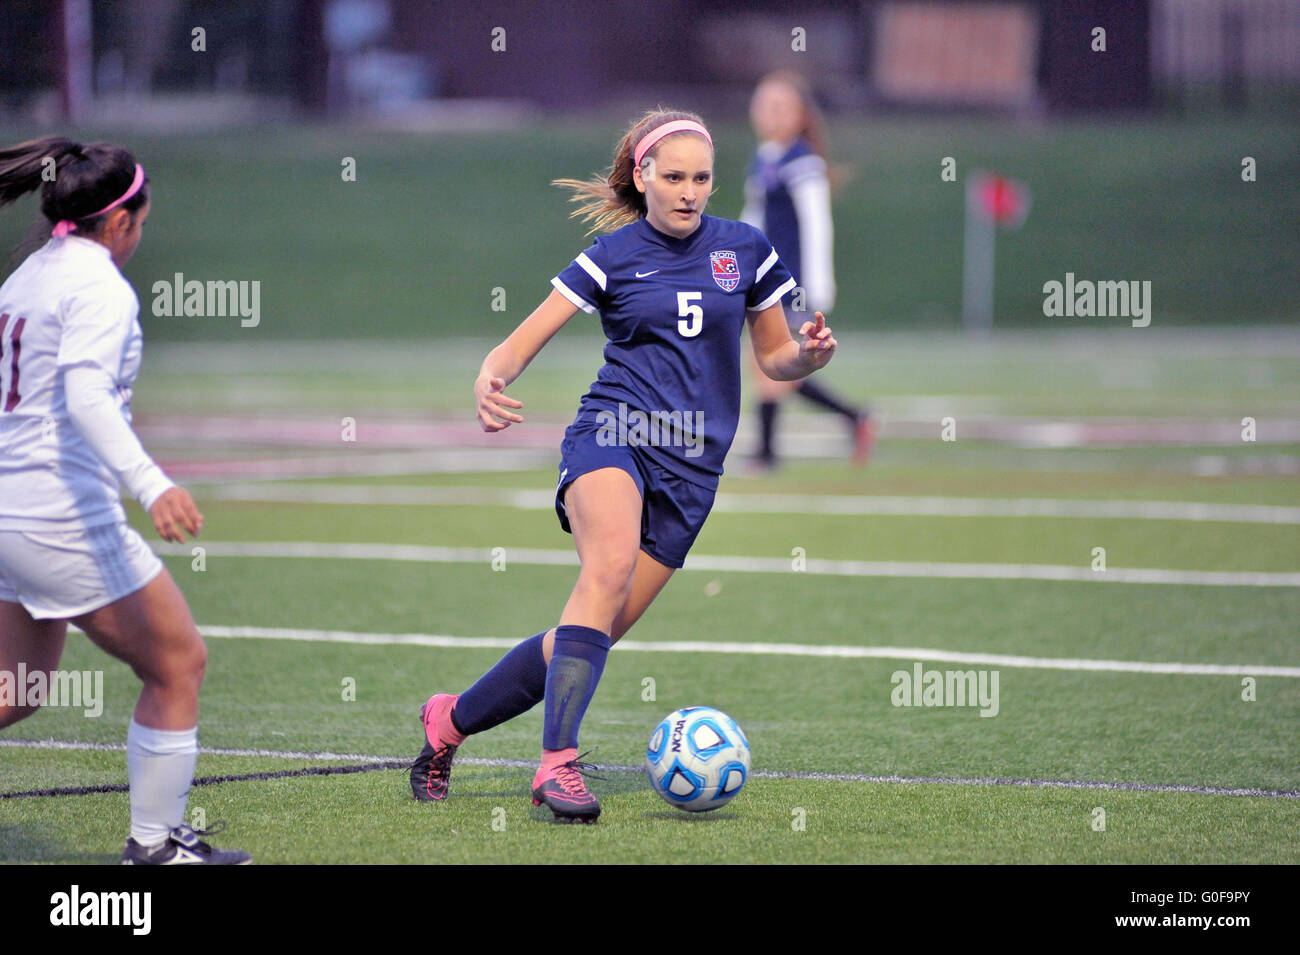 Cutting across the pitch, a player seeks a pass target down the sideline as her team was pressing for a score. USA. Stock Photo